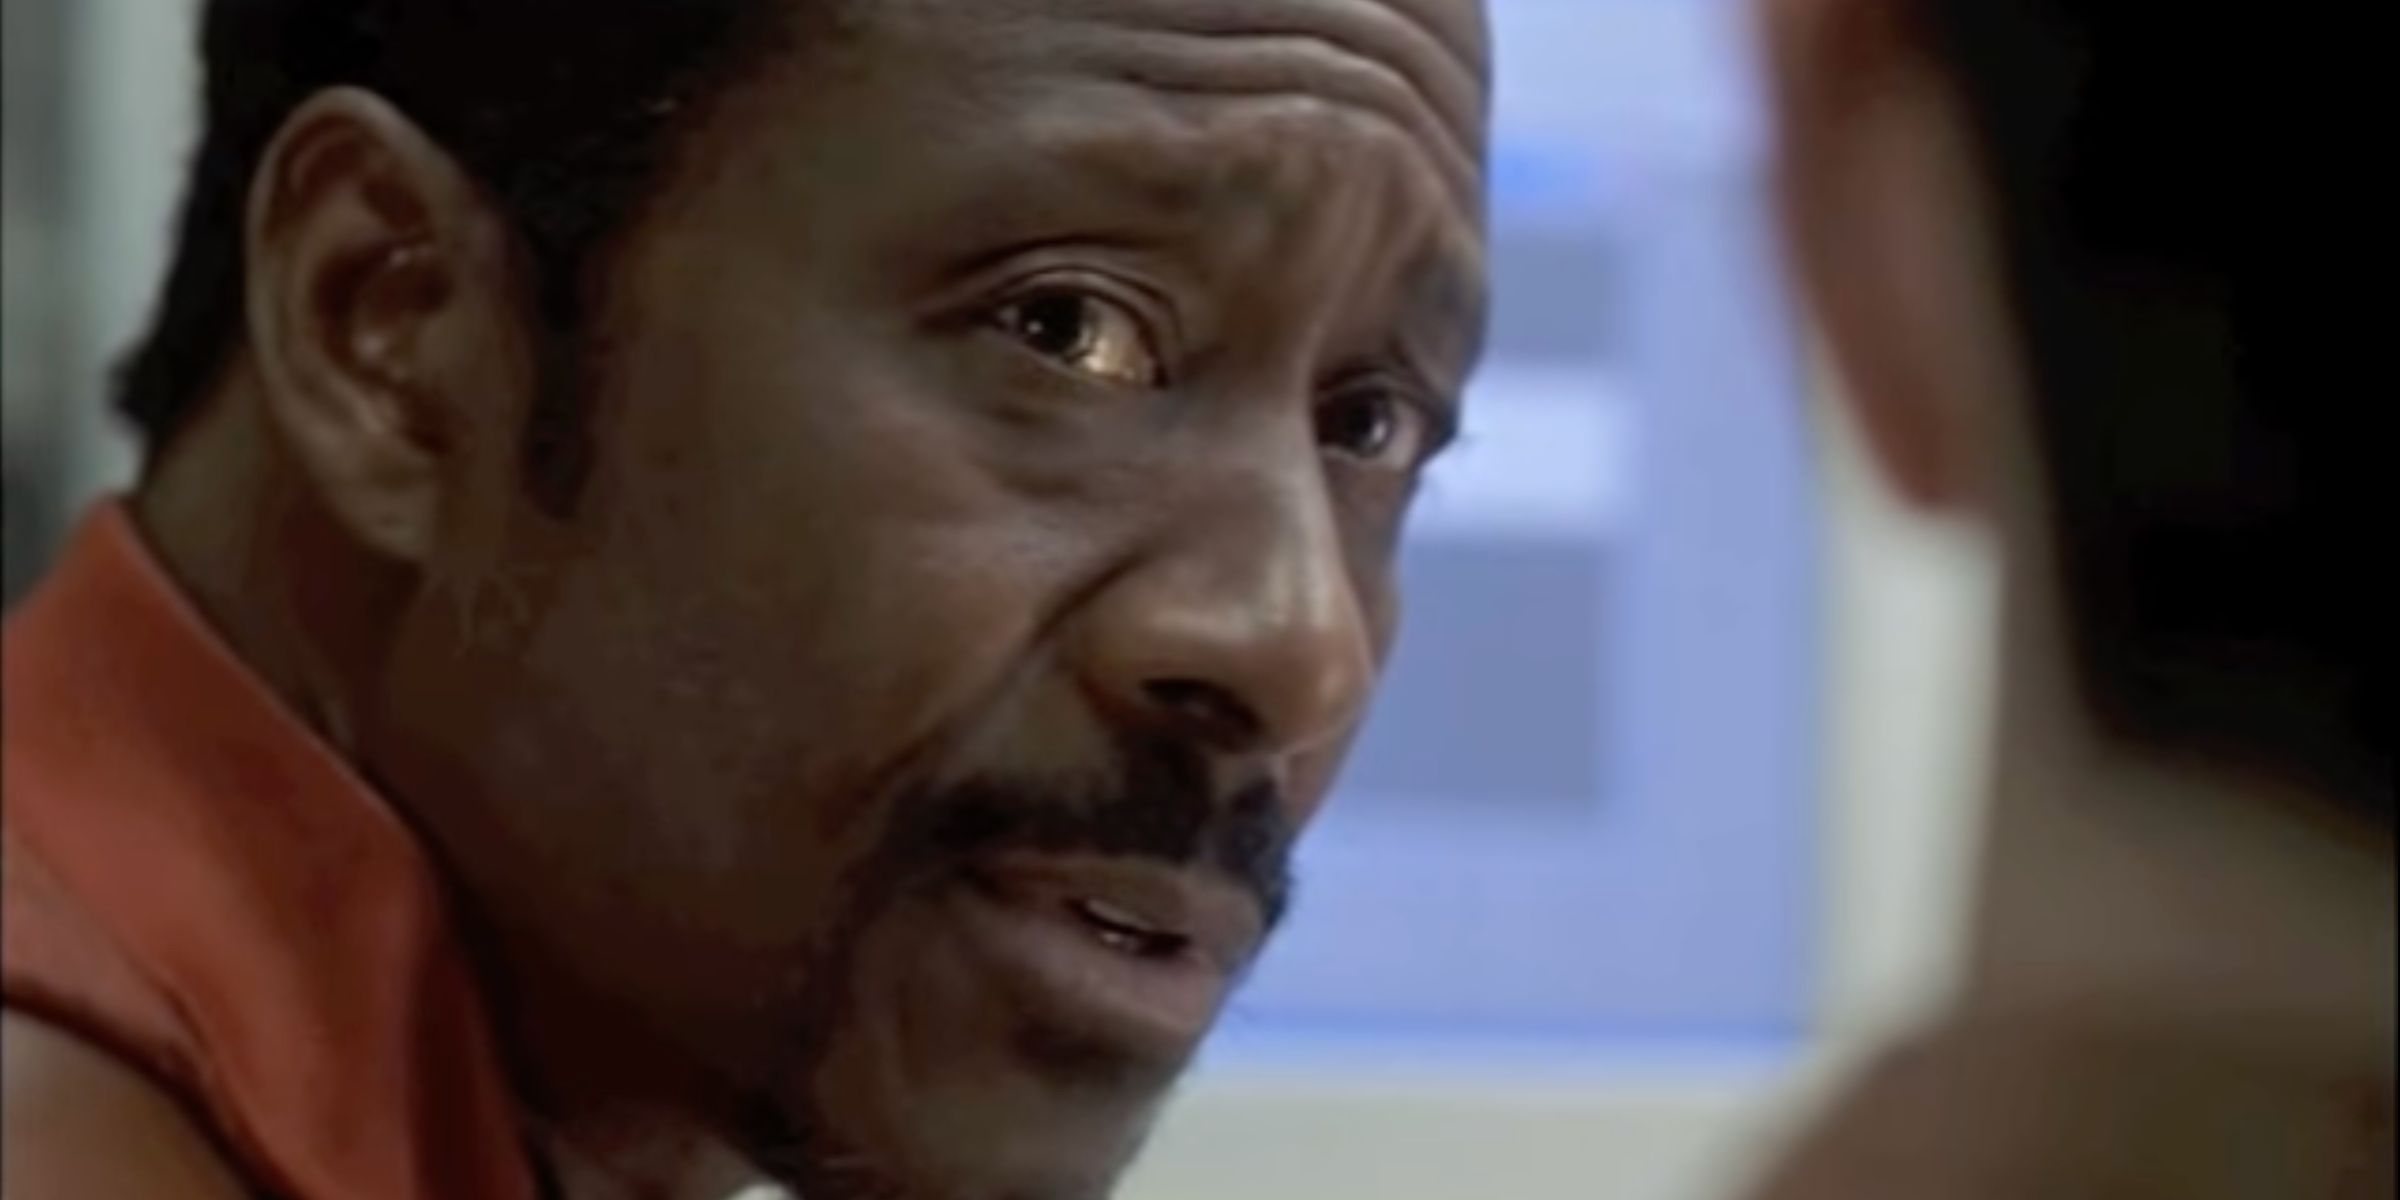 Detective Lester Freamon mentors a colleague as they classify recorded phone calls.